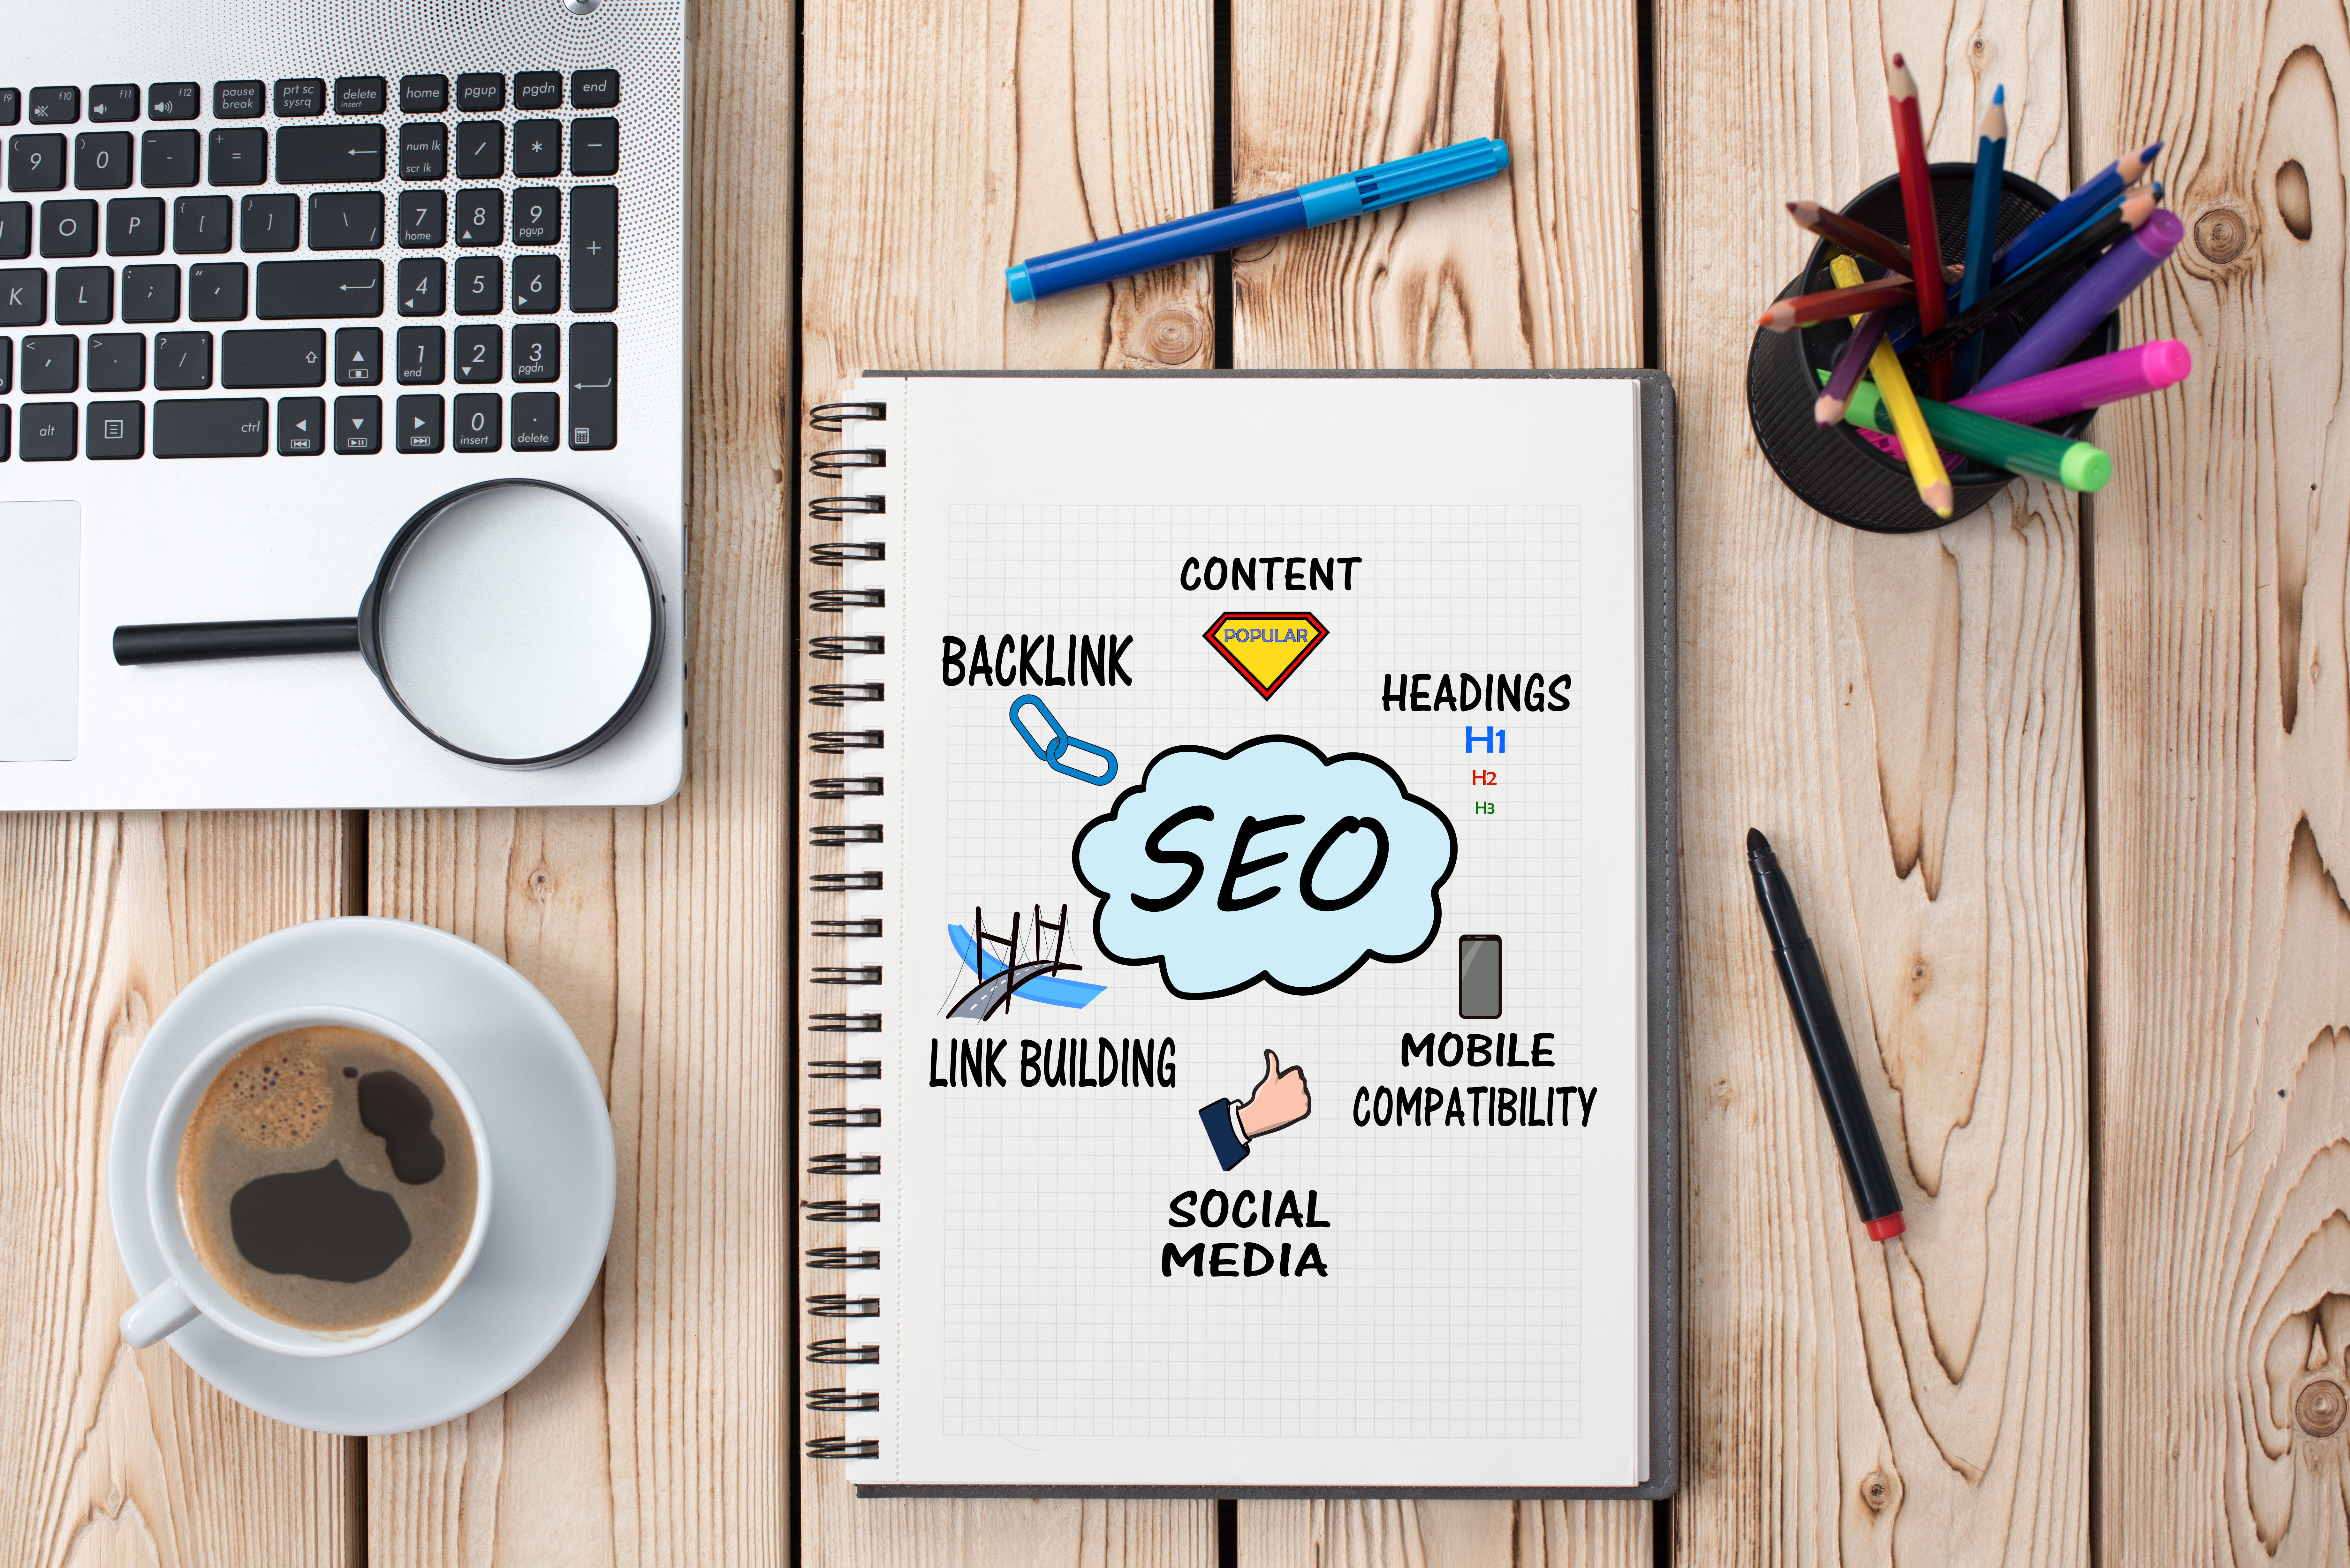 Search engine optimization, a process of describing content on a webpage or file using alternate descriptive elements as transparency for all users